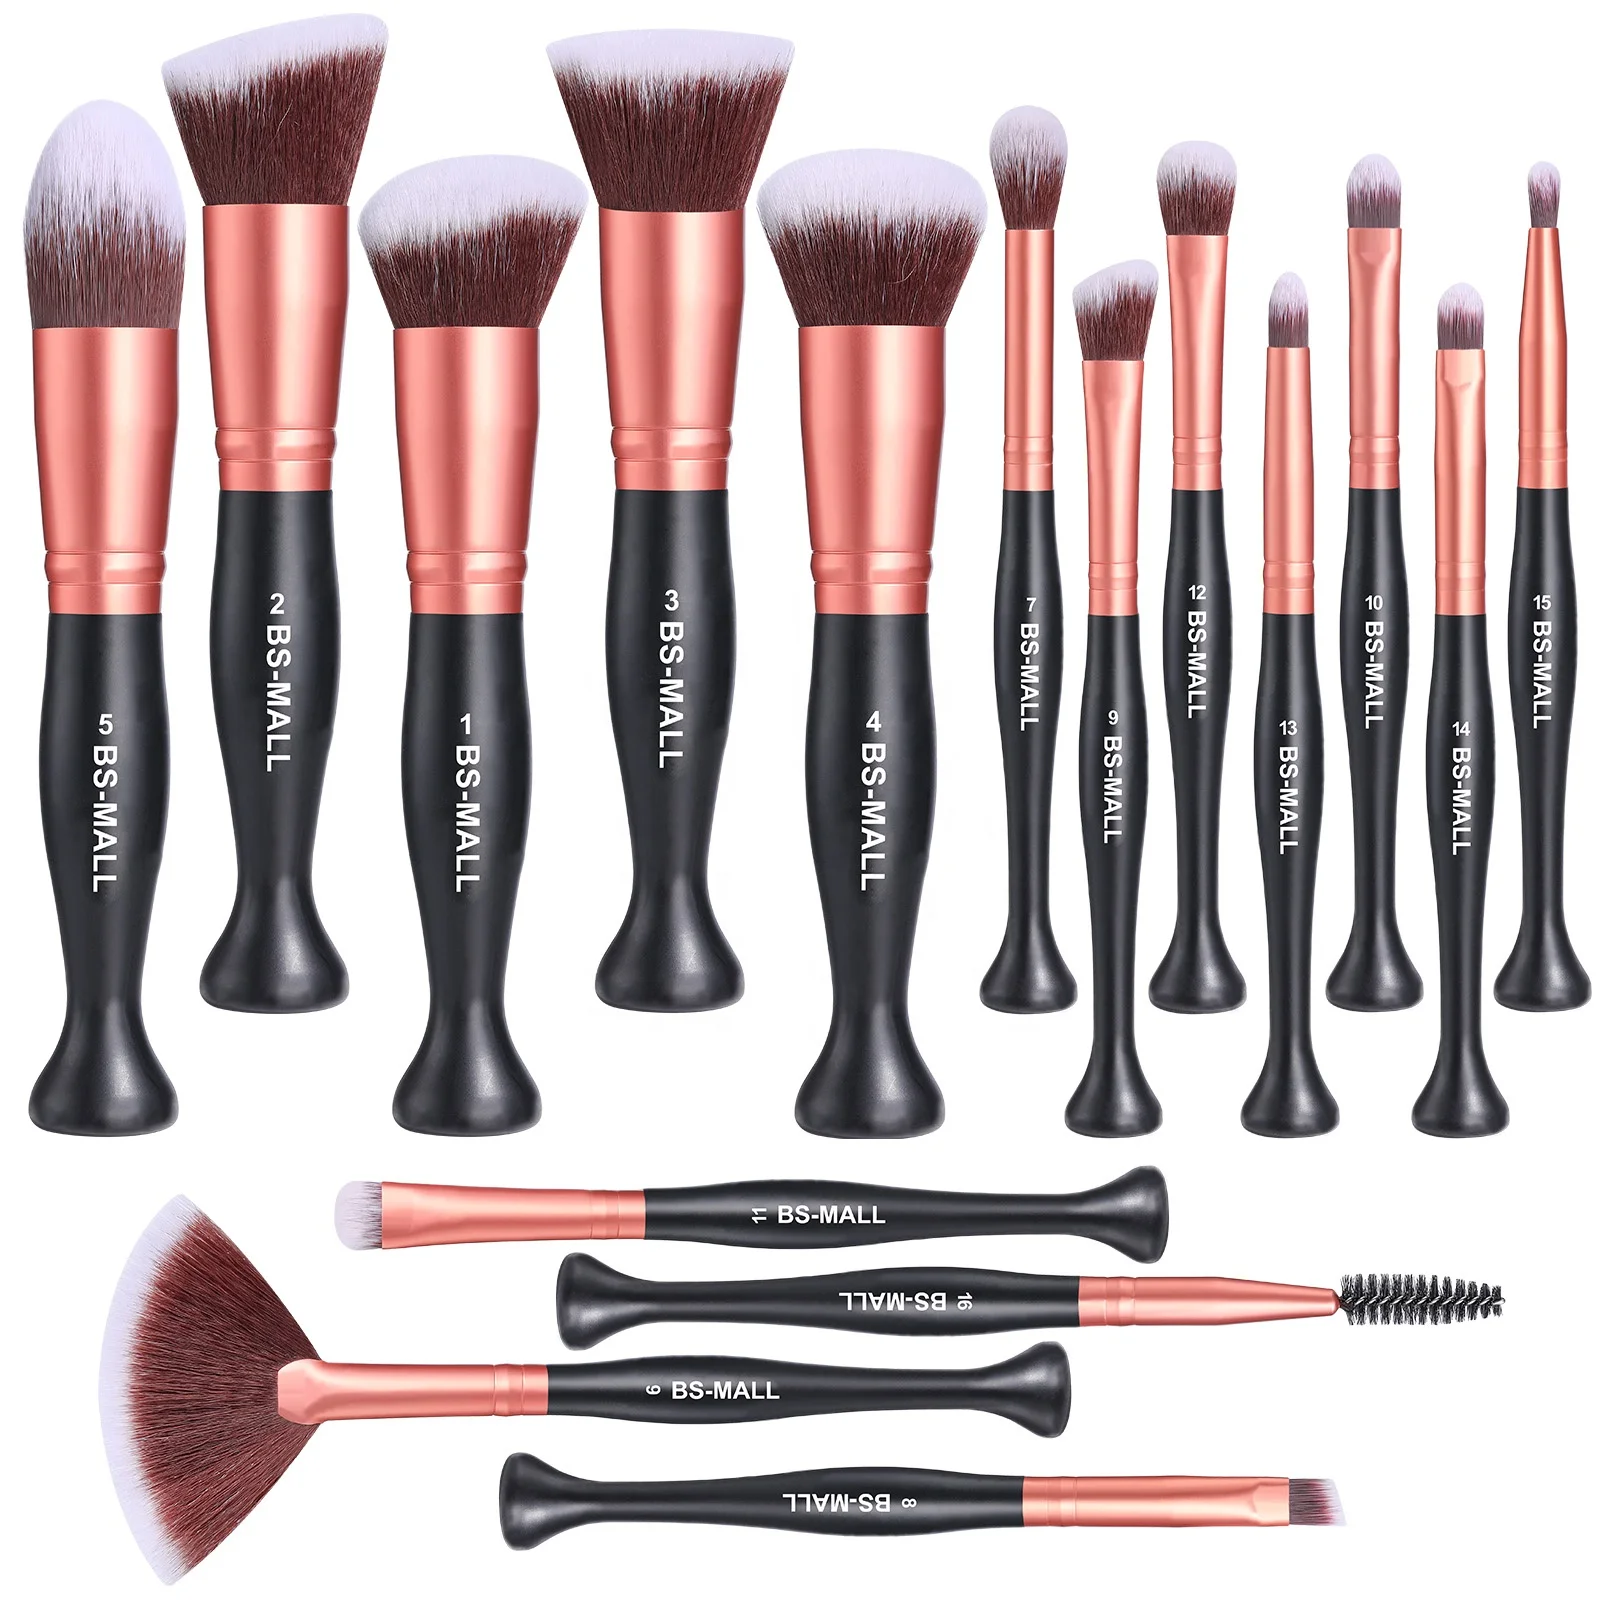 

BS-MALL Stand Up Makeup Brushes Set 16PCS Private Label Rose Gold Synthetic Brushes Makeup Wholesale, Picture or customized color makeup brushes